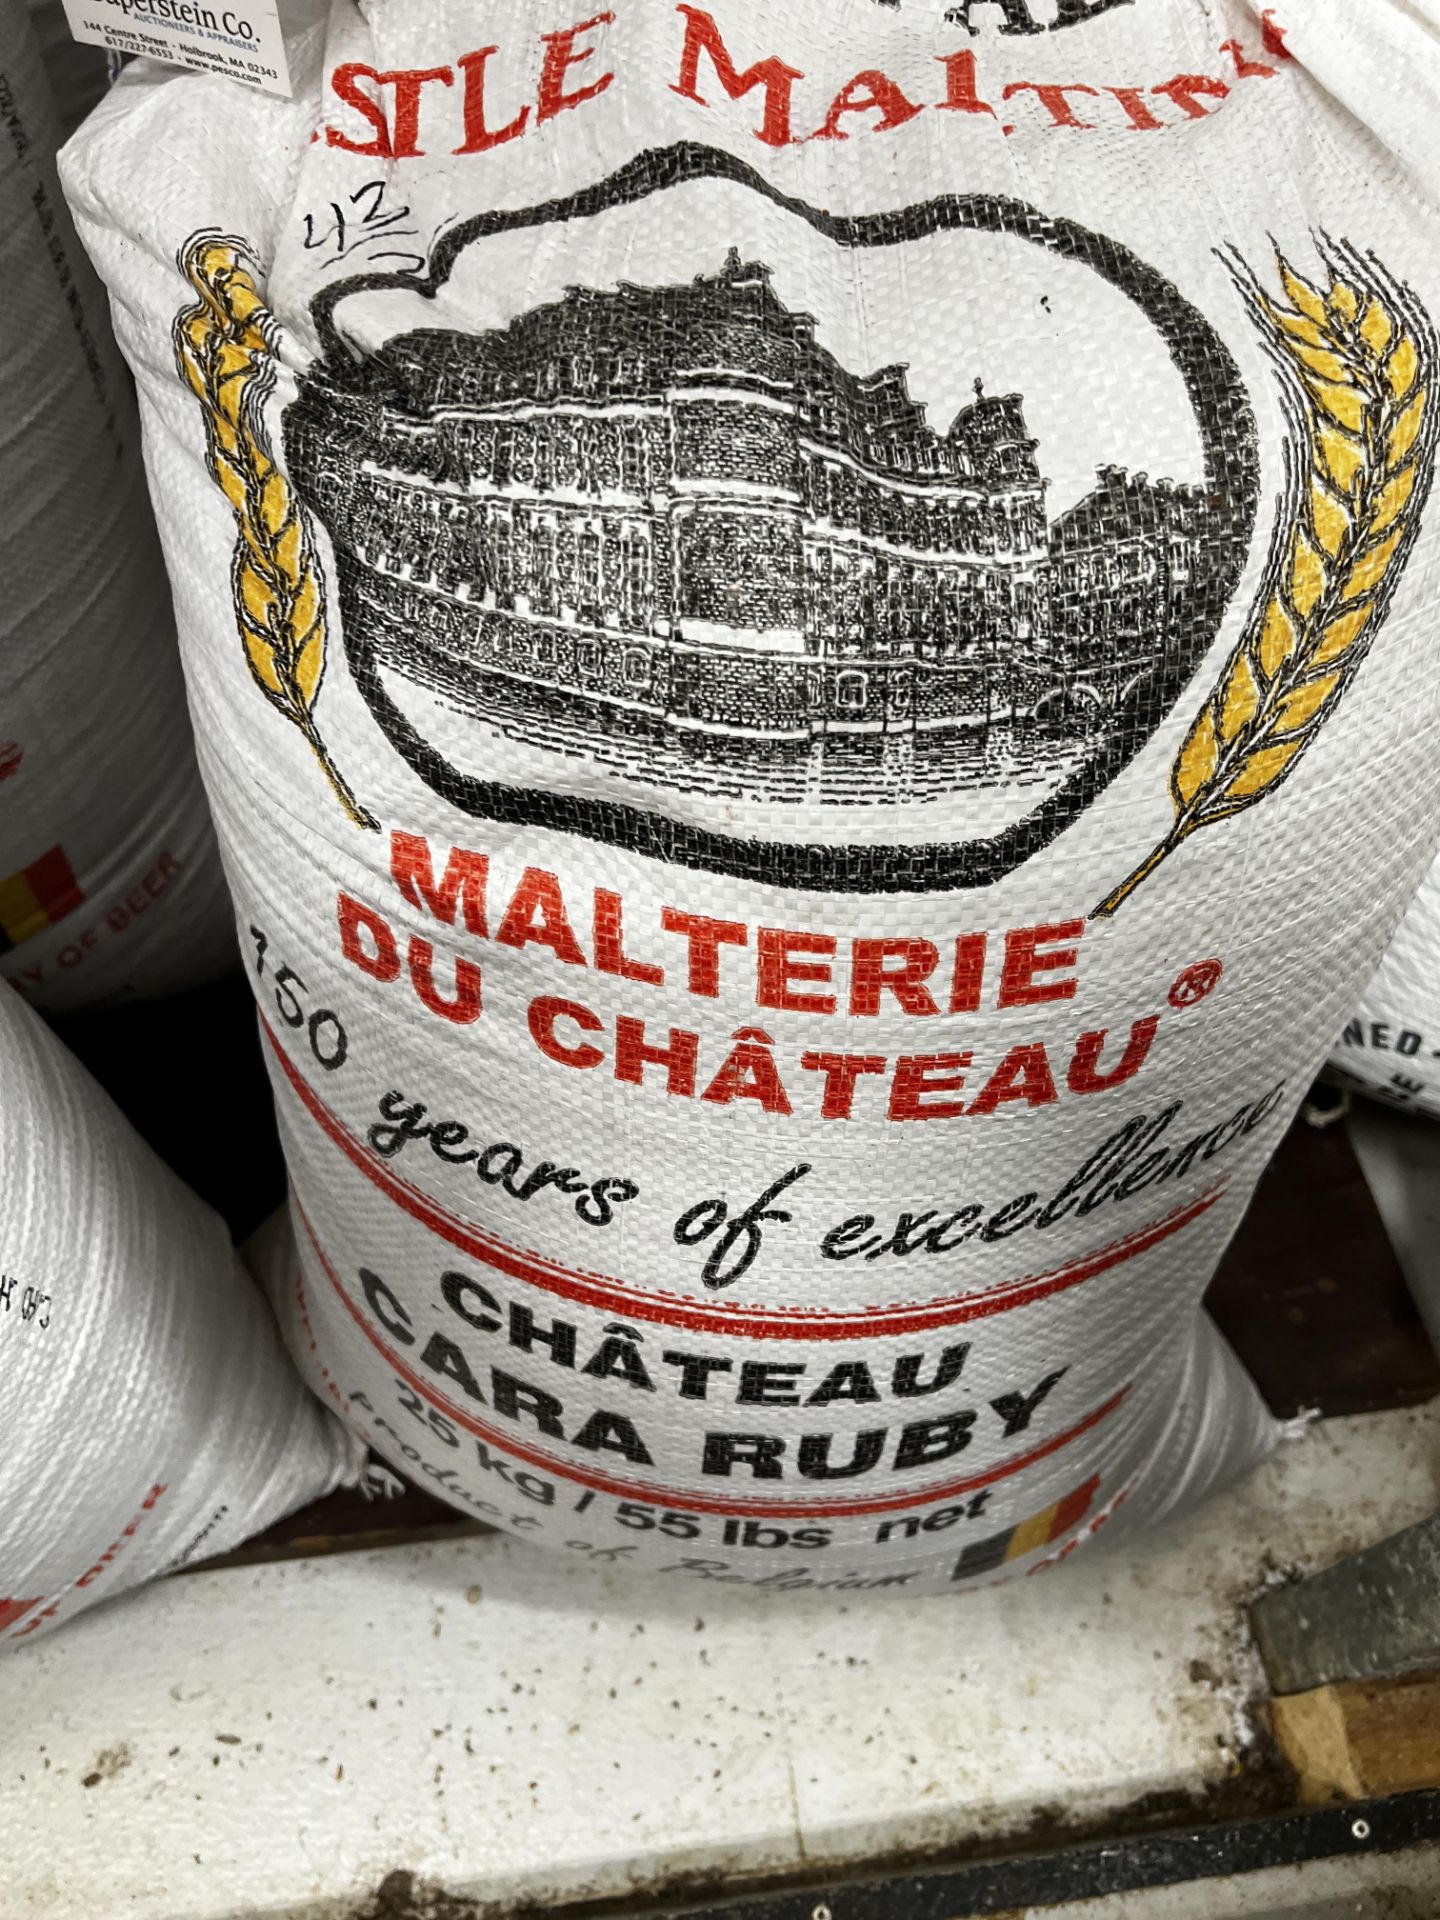 (2) 55Lb Bag of Malterie Chateau Ruby (Located In Lancaster)